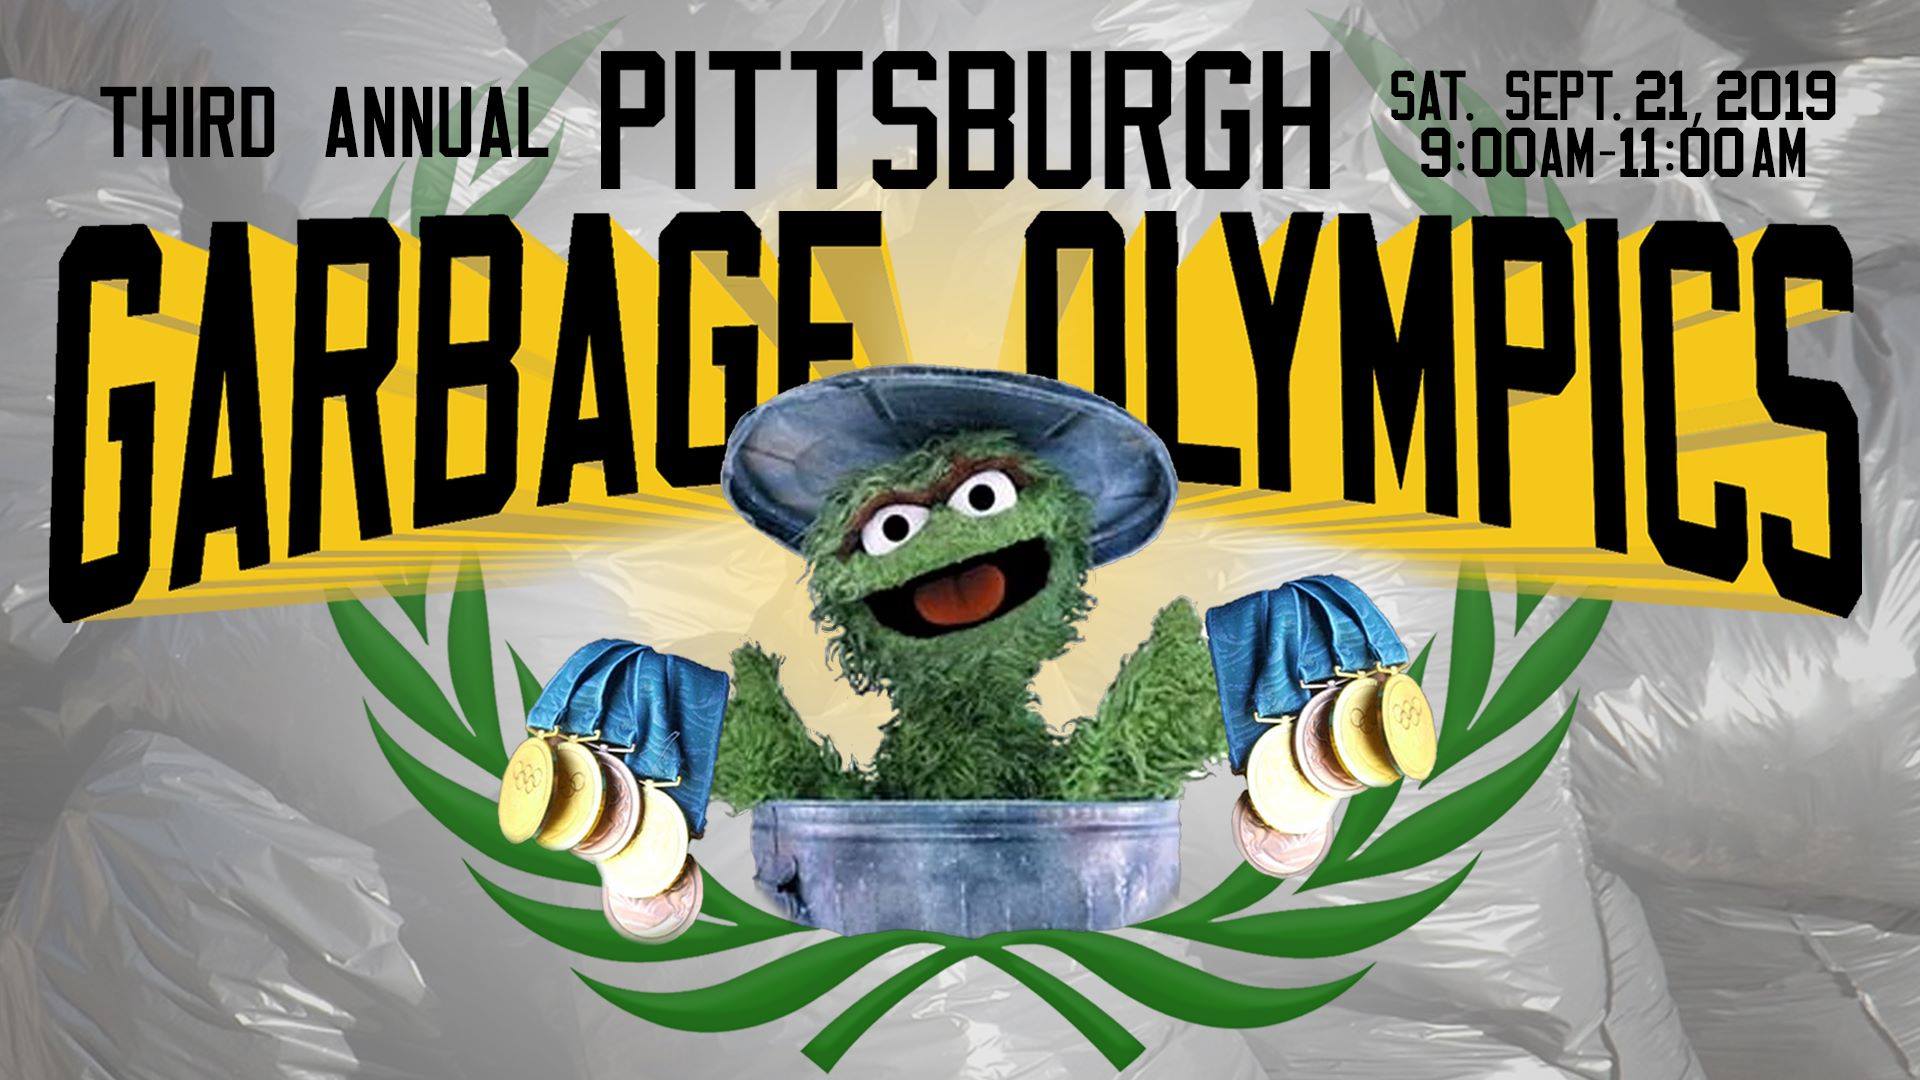 2019 Pittsburgh Garbage Olympics Lawrenceville United